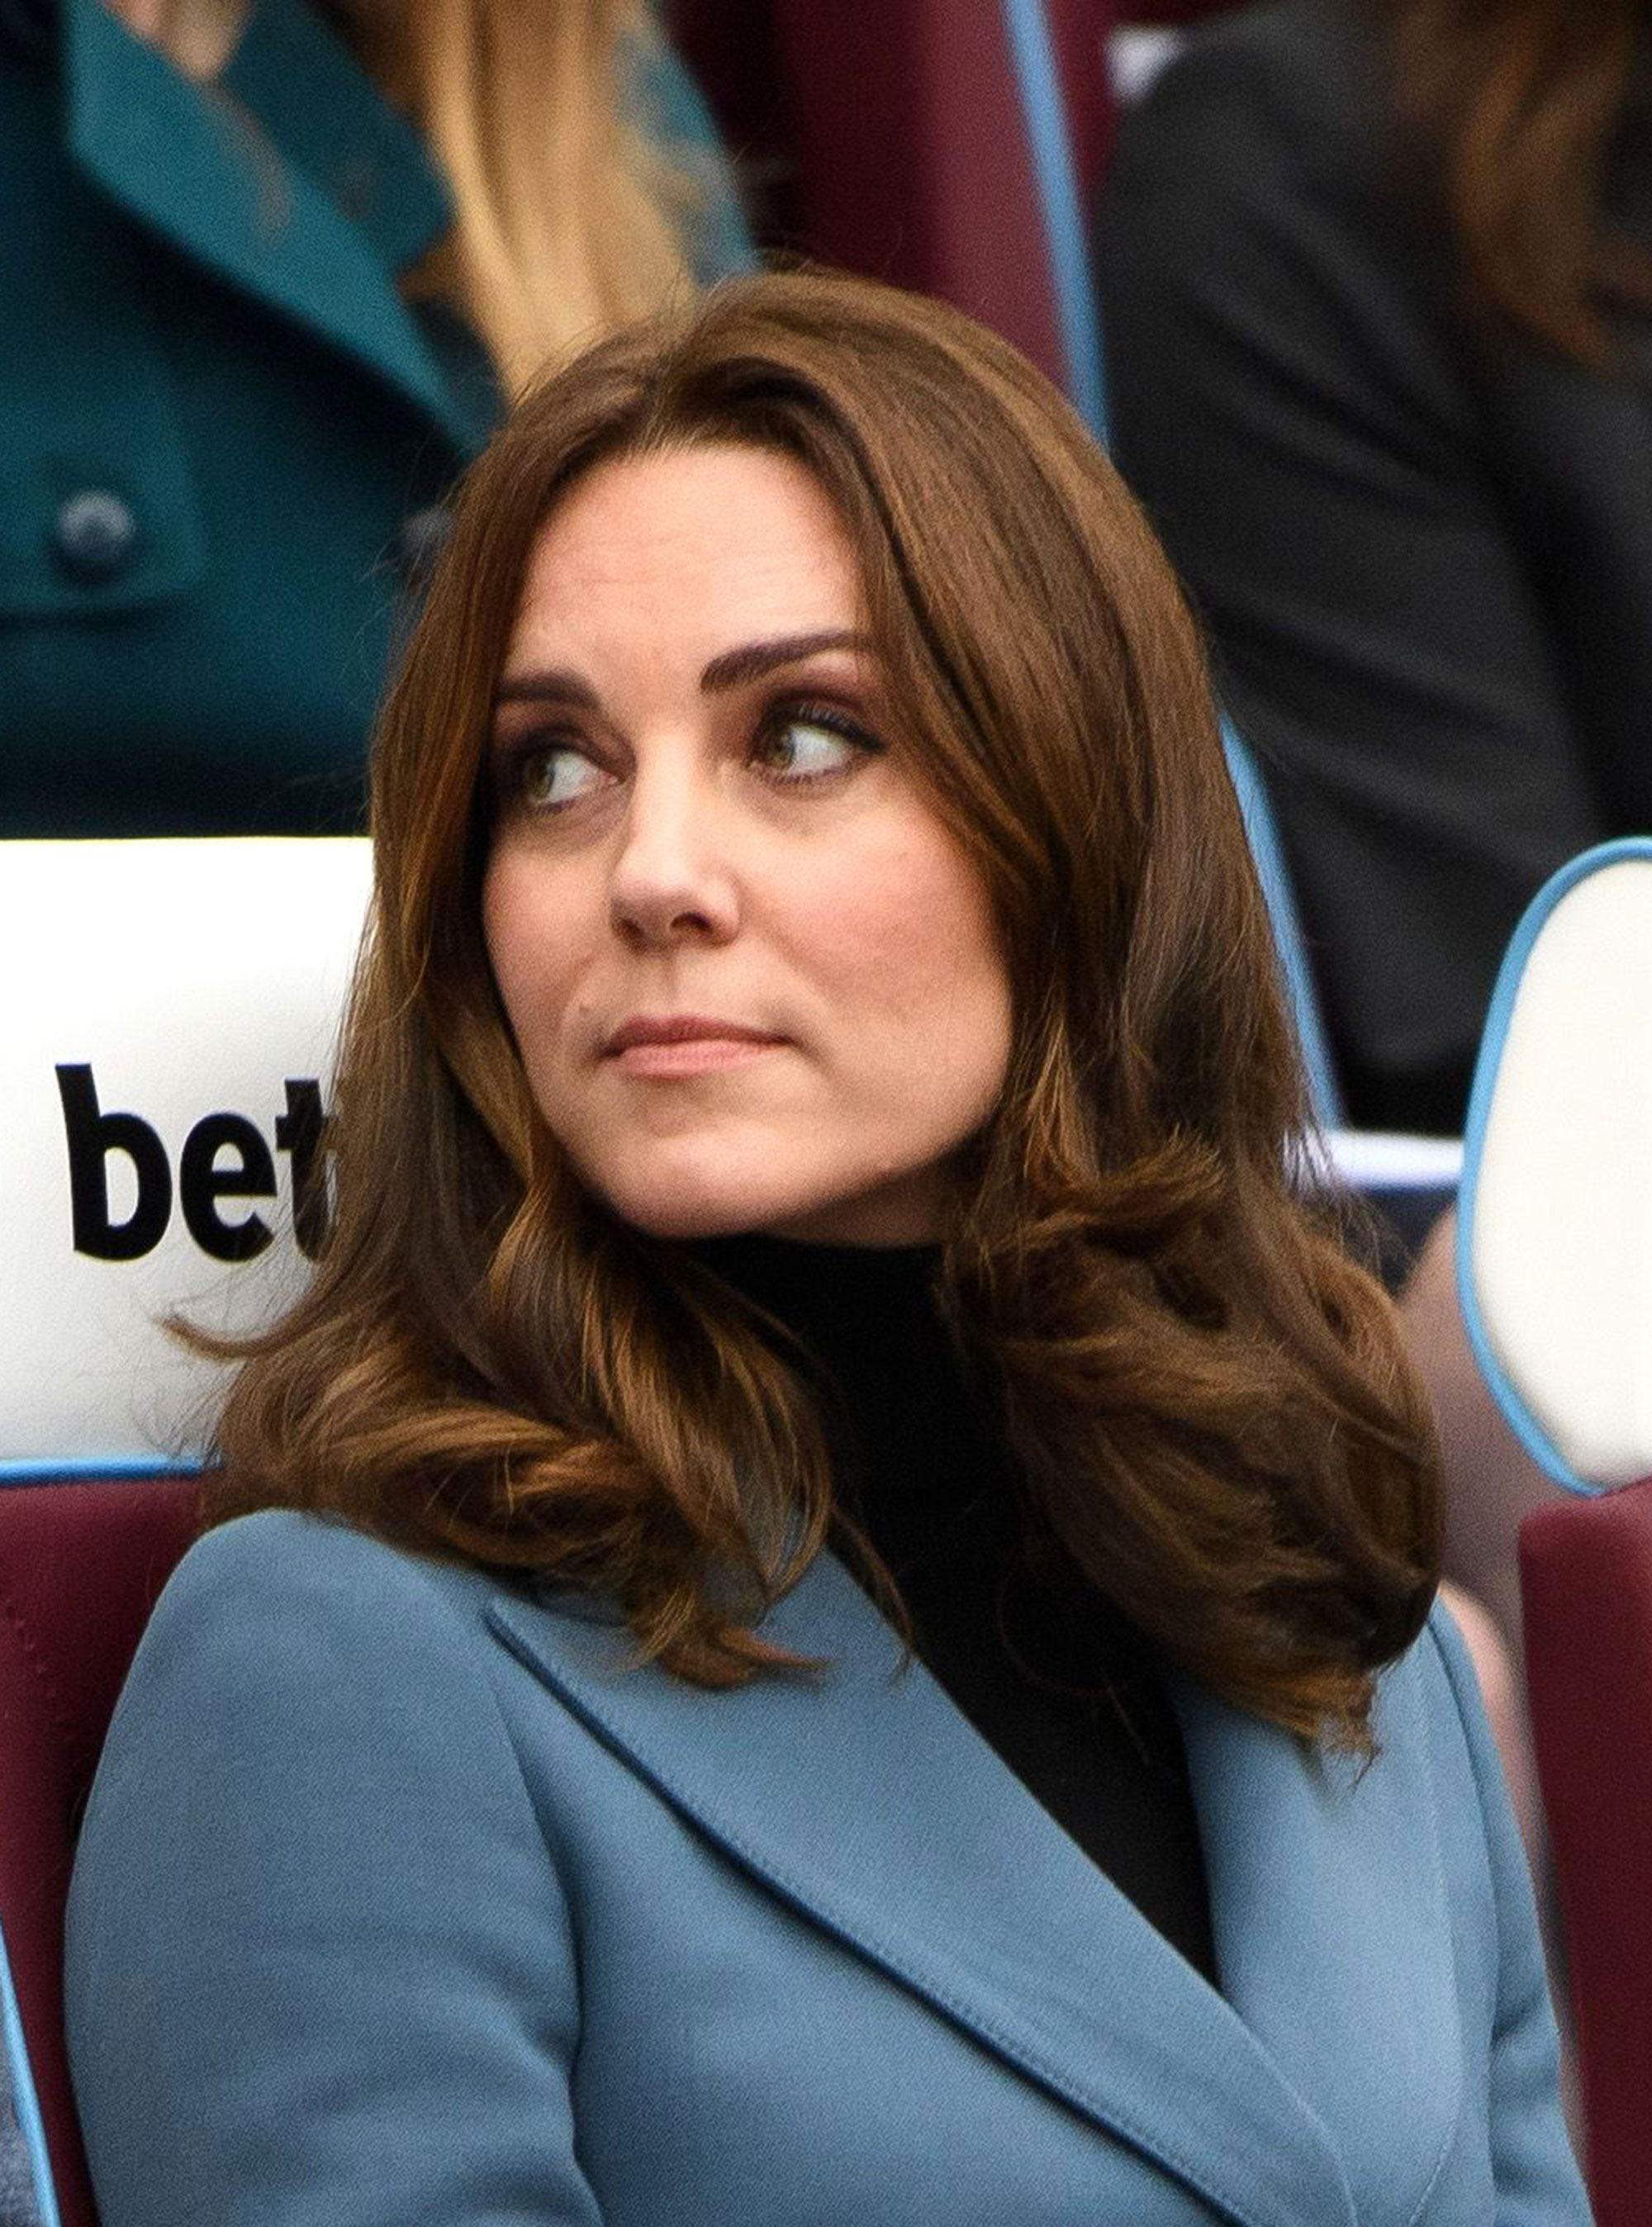 Duchess Of Cambridge's Degree Would Make Her Most Educated Queen In ...